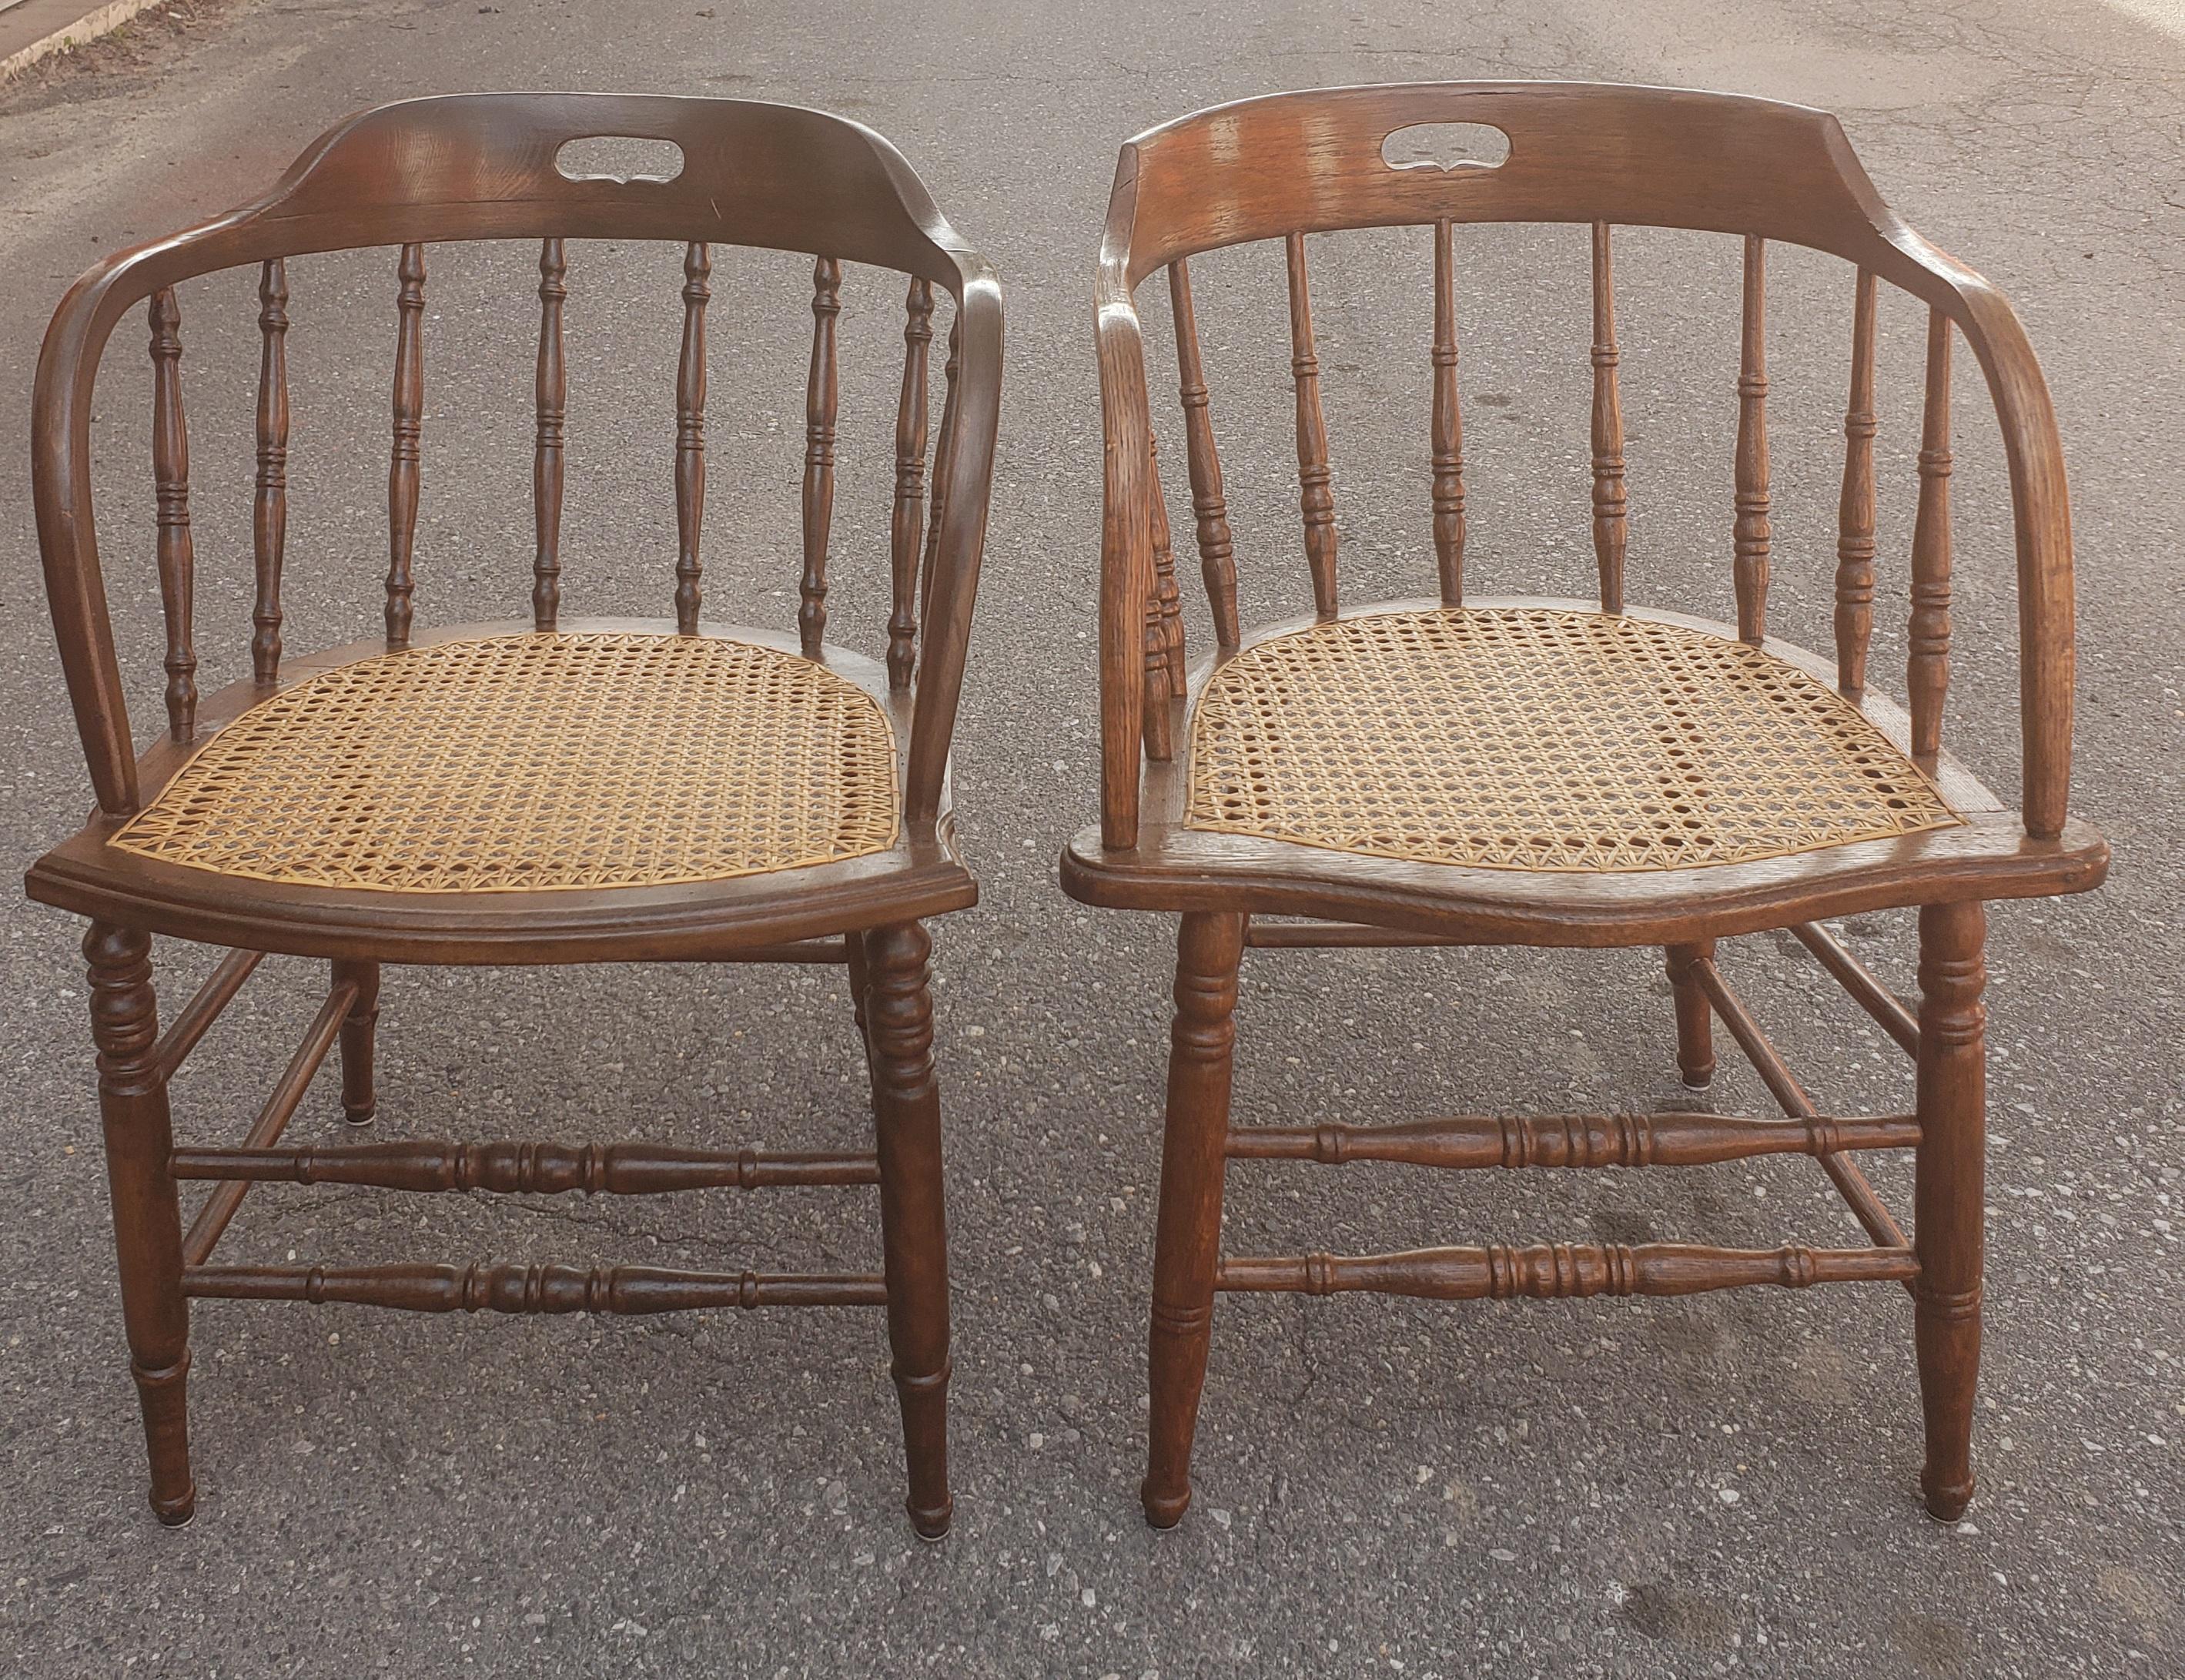 Early 20th century mismatched barrel back oak Windsor pub chairs
American chairs in the style of Boling
Each chair is slightly mismatched (see all images) but they work well together
Each chair is approximately 21